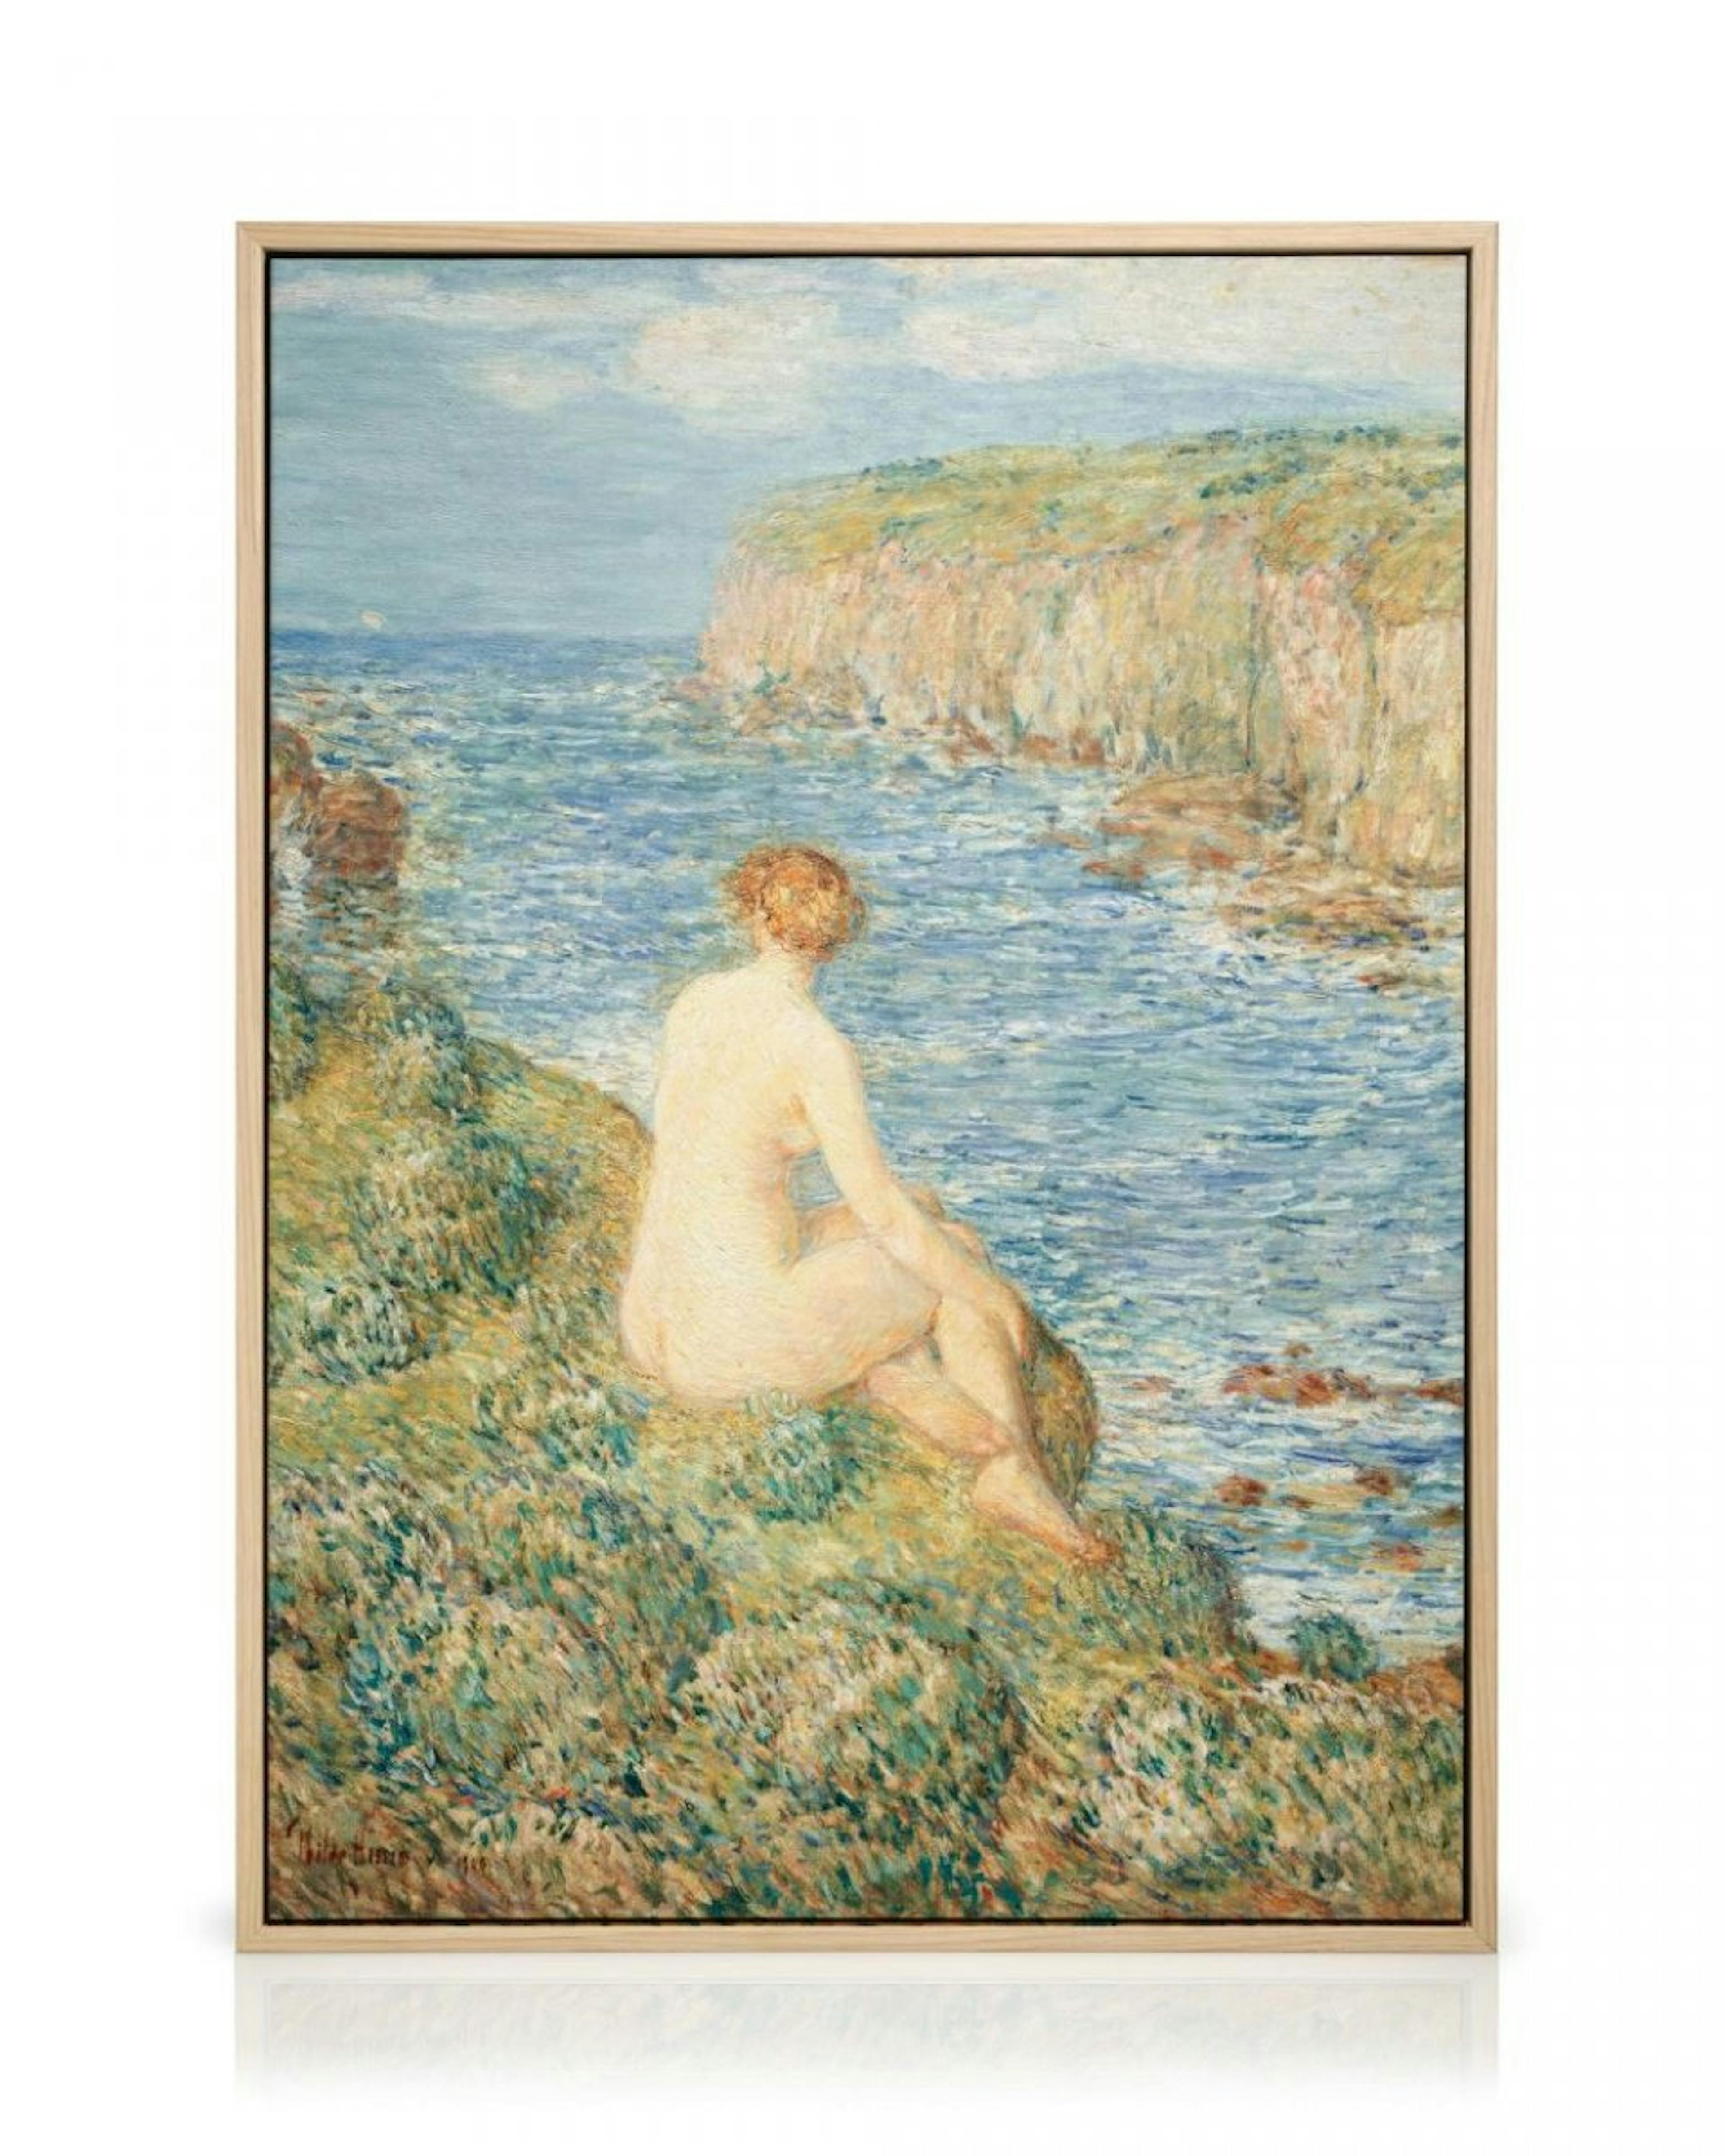 Frederick Childe Hassam - The Nymph and Sea Canvas